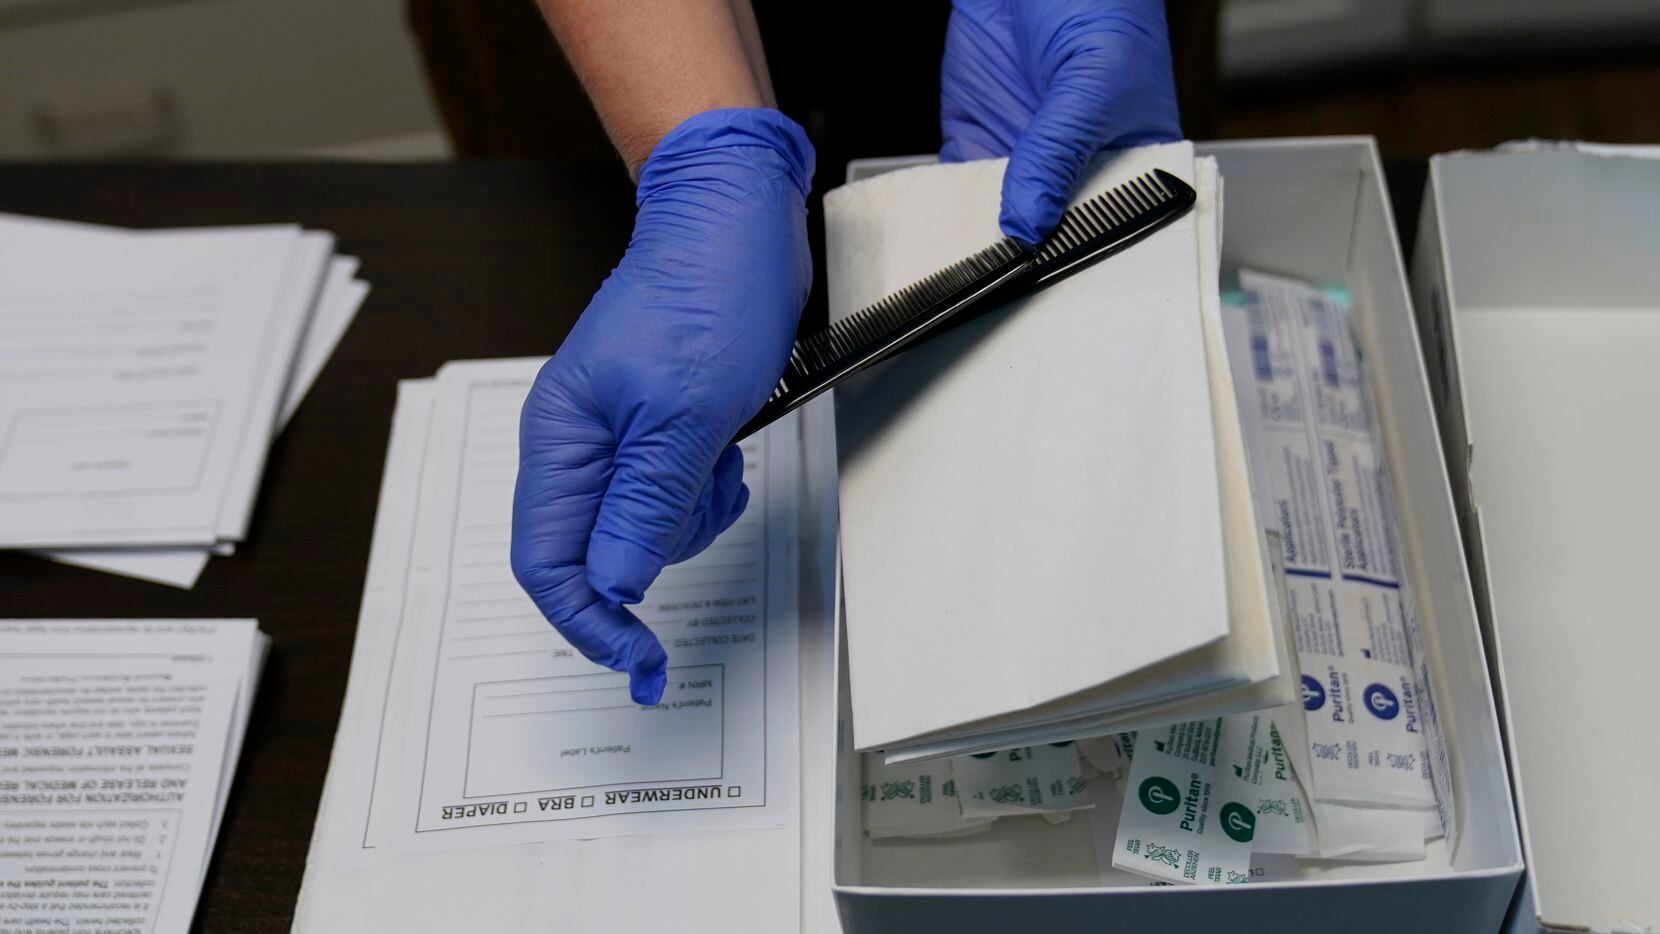 A rape kit is unpacked in an examination room in Austin. More than 14,000 rape crimes have...